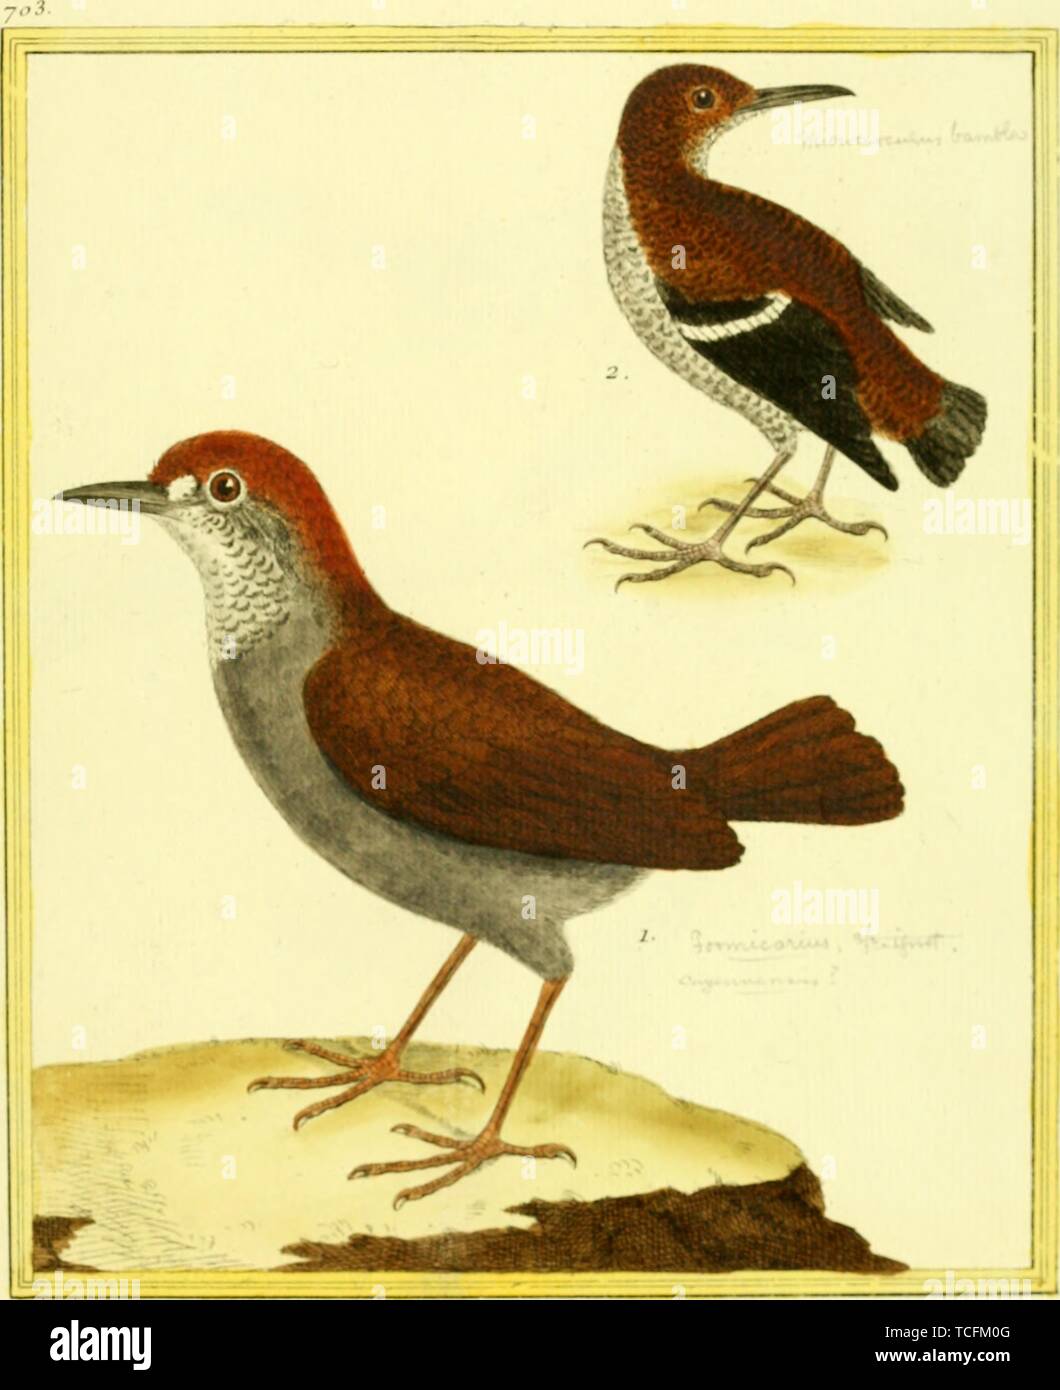 Engraved drawing of the Rufous-capped Antthrushes (Formicarius colma), male and female, from the book 'Planches enluminees Dhistoire naturelle' by Francois Nicolas, Louis Jean Marie Daubenton, and Edme-Louis Daubenton, 1765. Courtesy Internet Archive. () Stock Photo